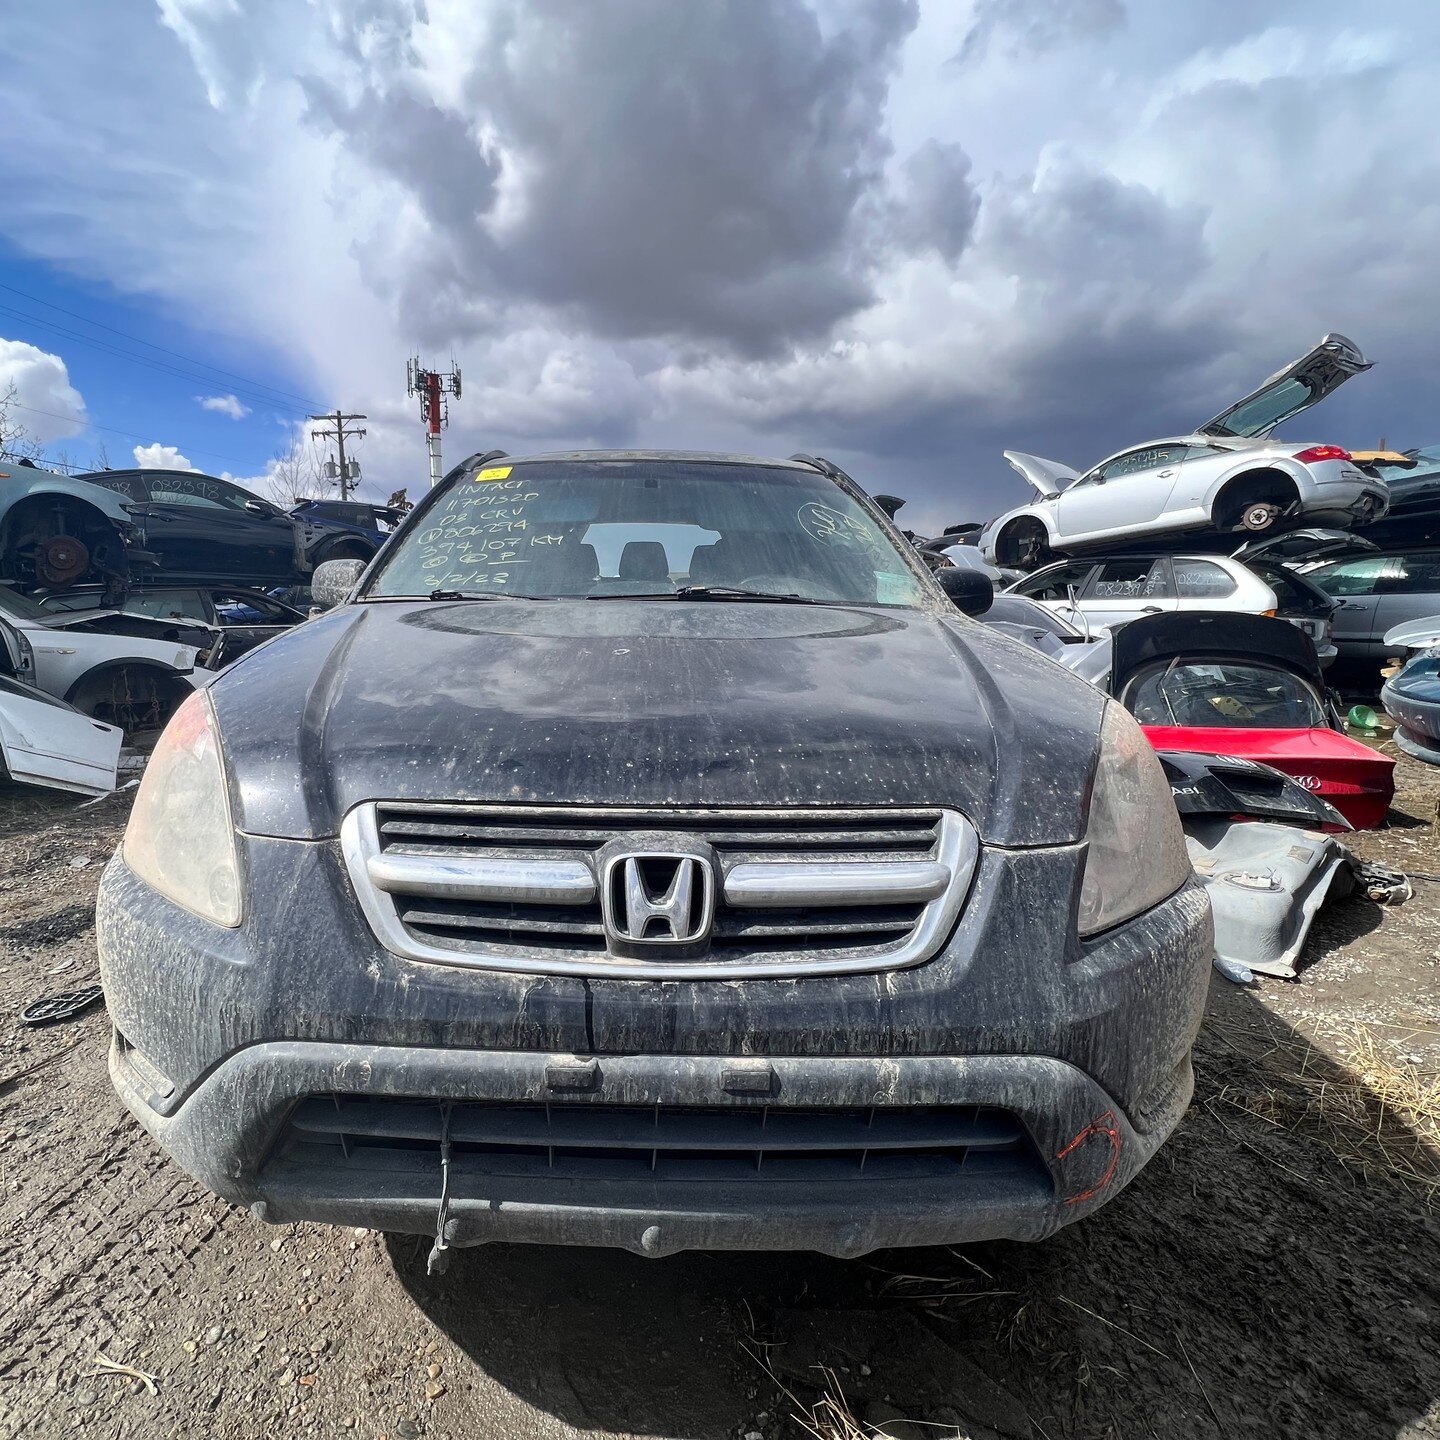 2003 HONDA CRV EX 2.4L *FOR PARTS* - 4WD, 4 SPEED AUTOMATIC TRANSMISSION, 4 CYCLINDER , BLACK(B92P), KMS:244886, VIN:JHLRD789X3C806294 

We offer contactless delivery and are more than willing to accommodate your needs.
Why pick your part when we pul